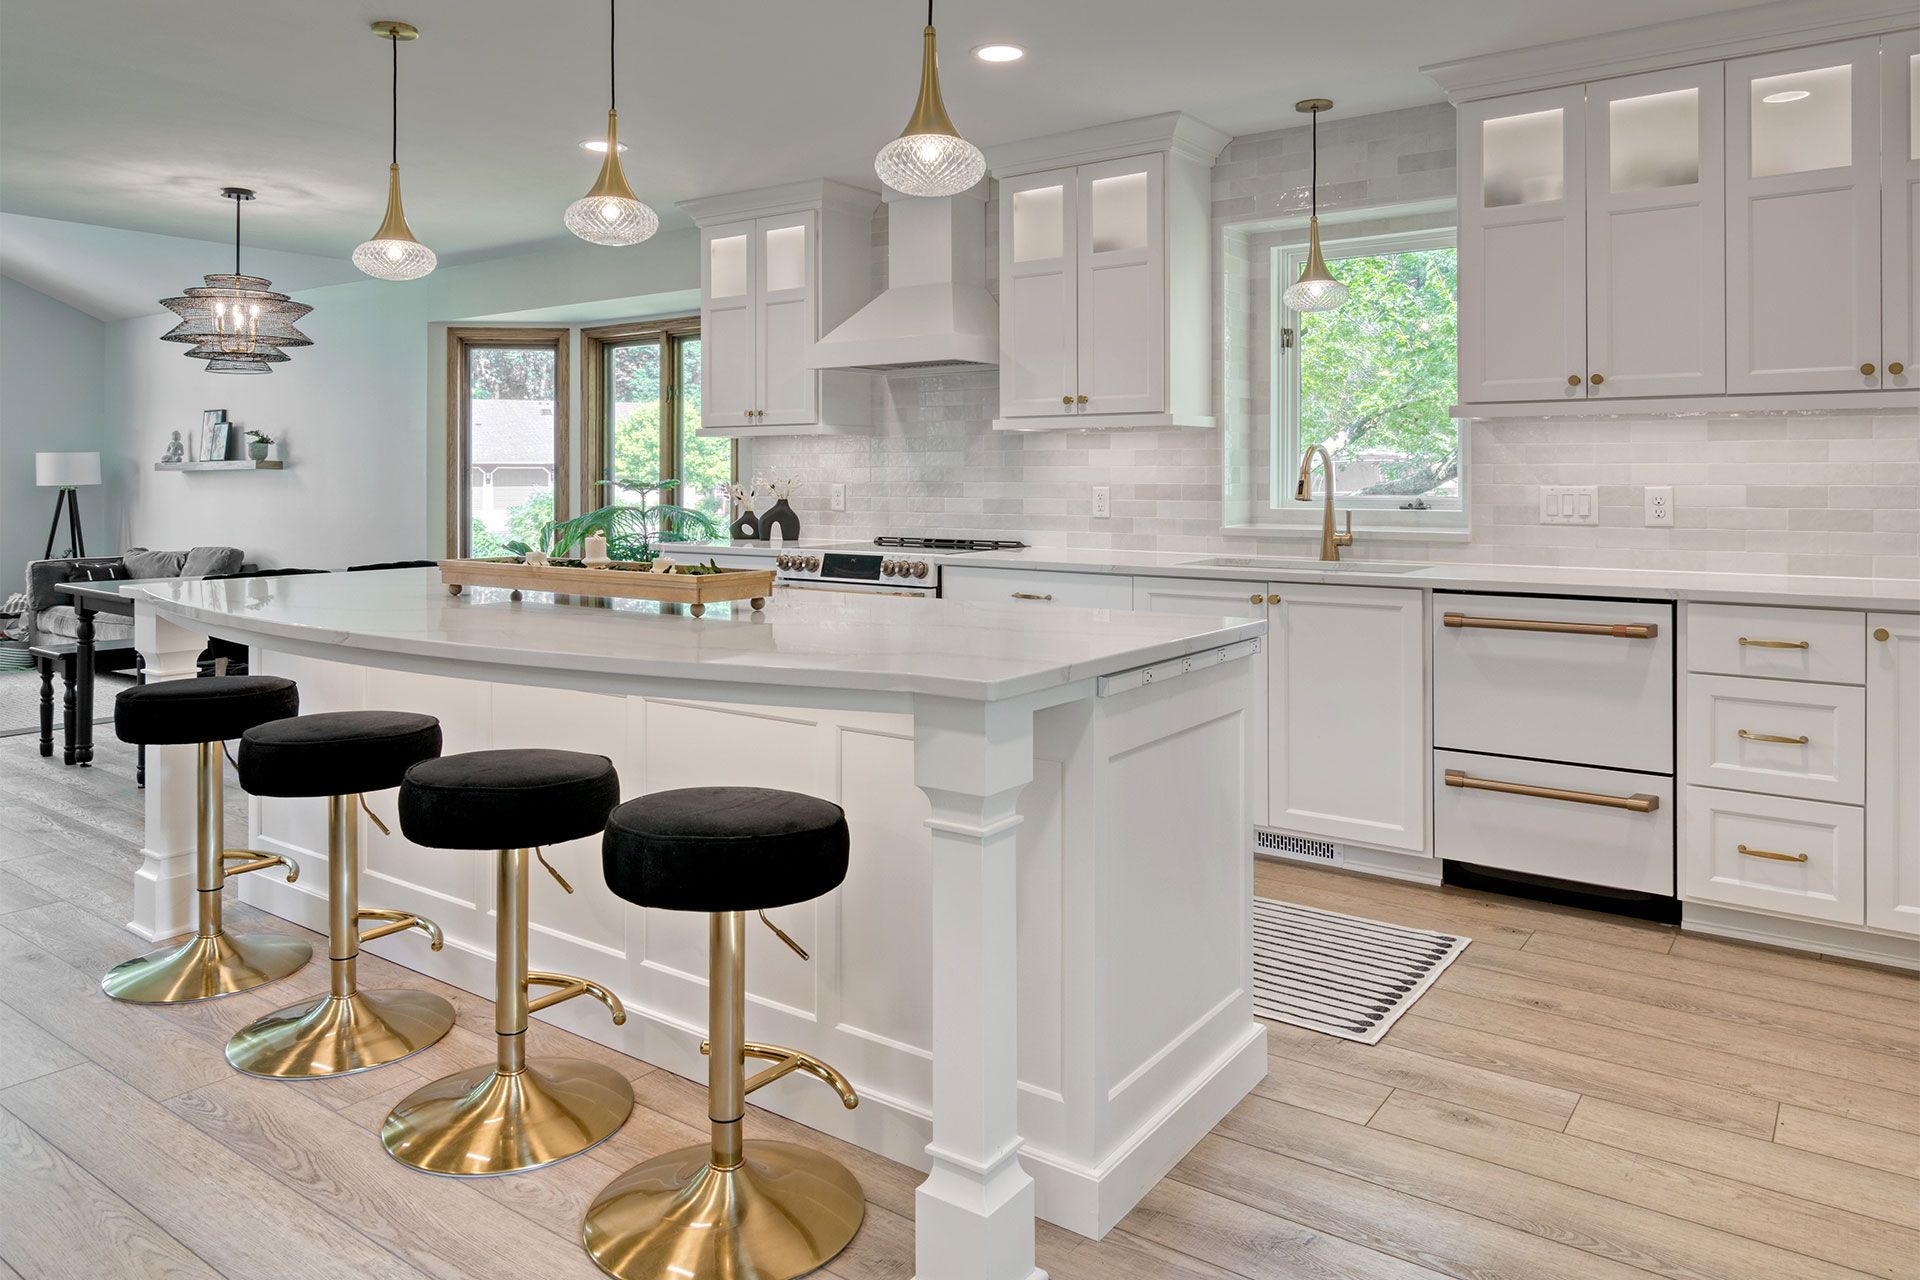 White kitchen with gold fixtures and stools